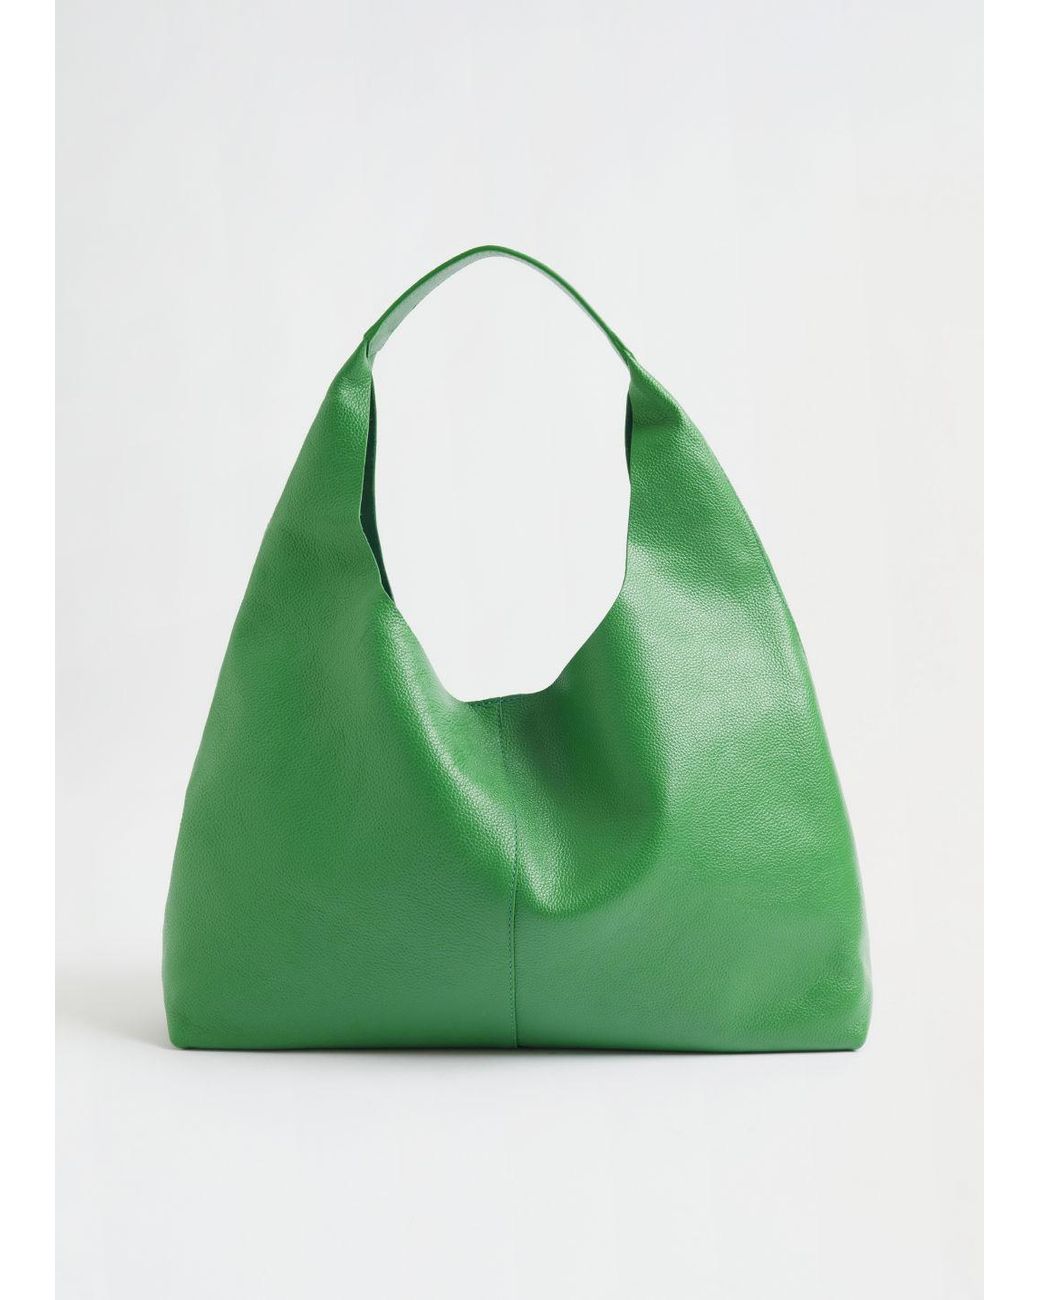 & Other Stories Grainy Leather Tote Bag in Green | Lyst